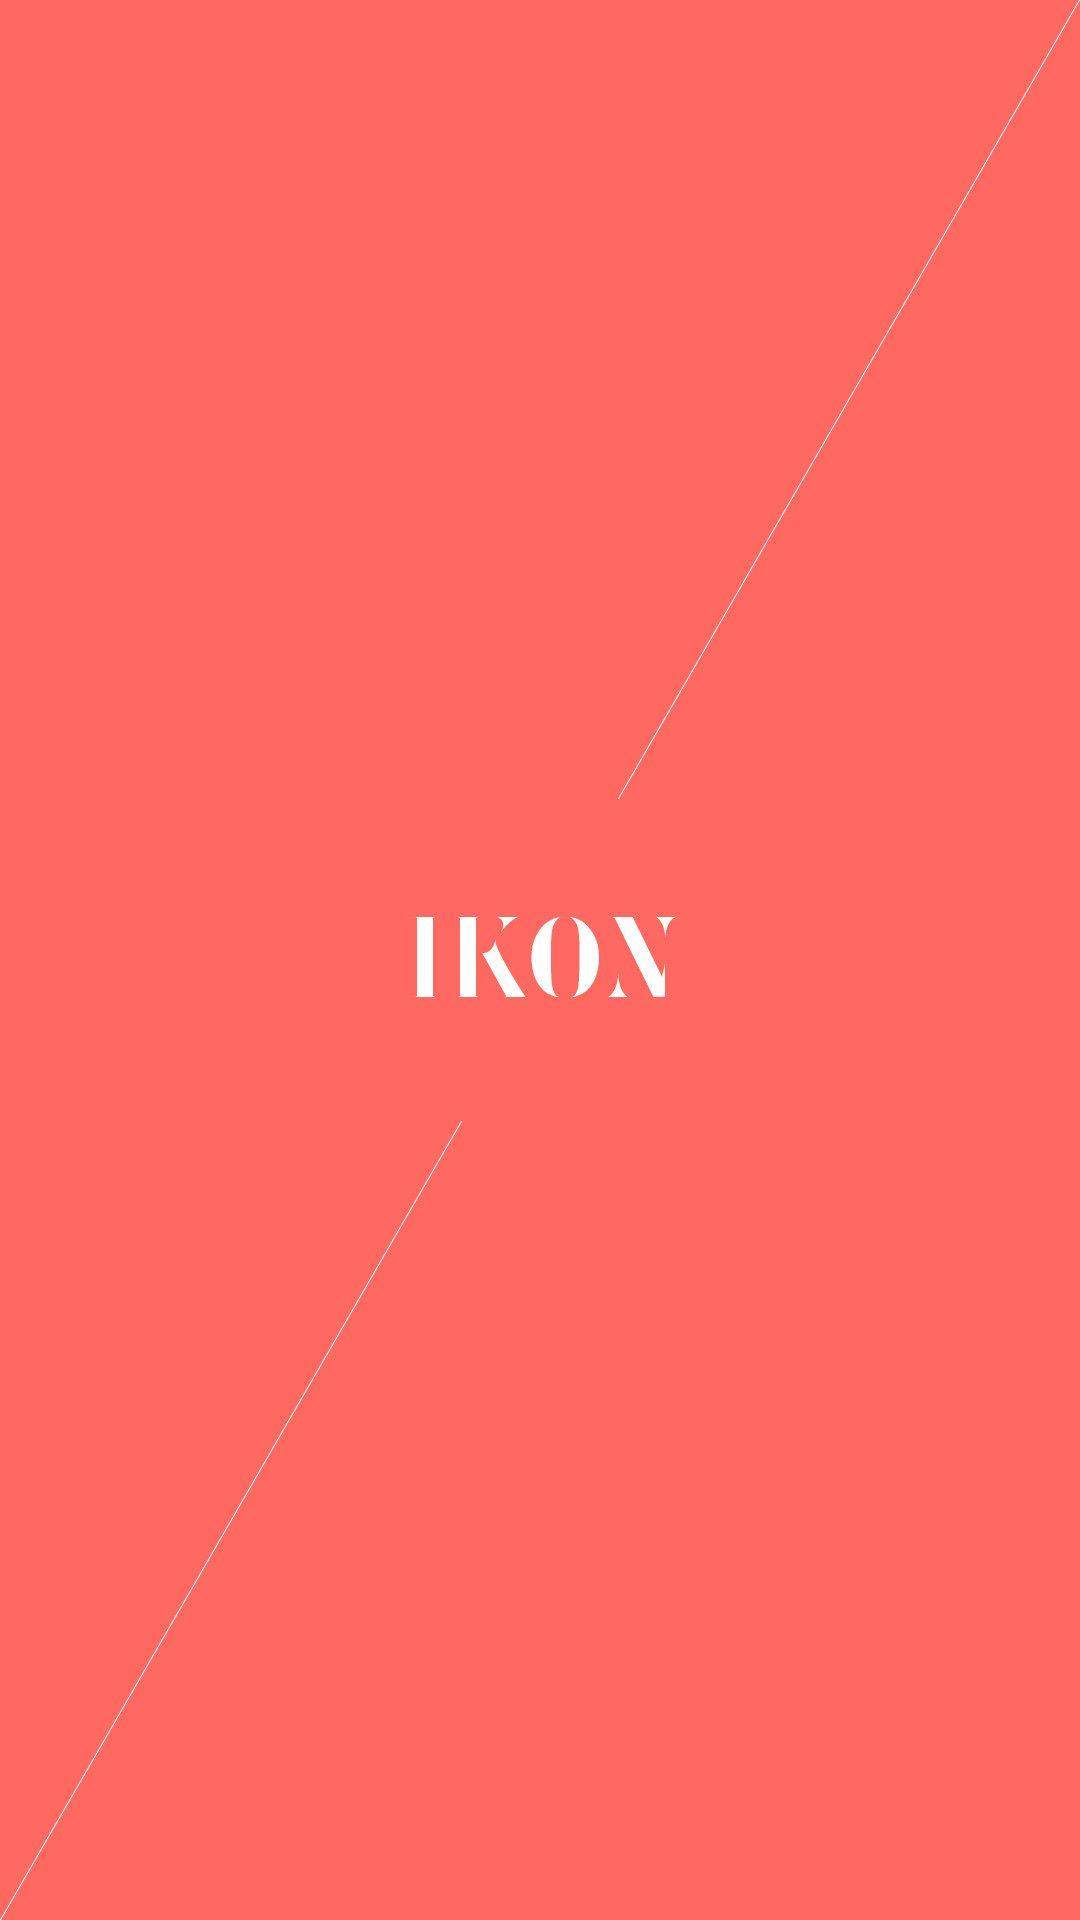 Ikon Wallpaper background picture